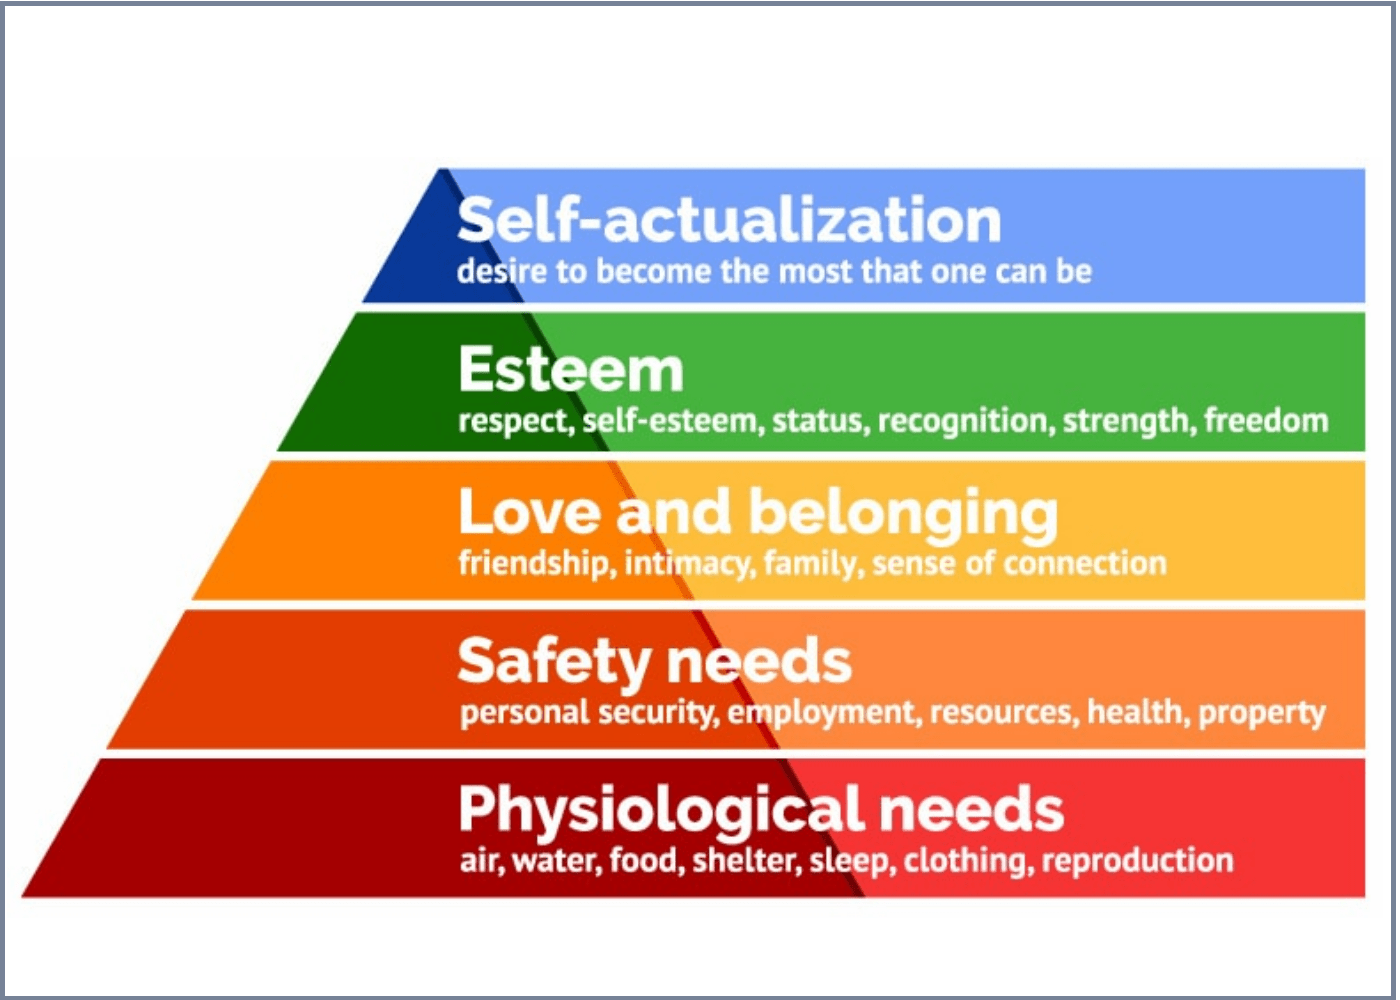 Maslow’s Hierarchy of Needs. Graphic from: Carrot Health